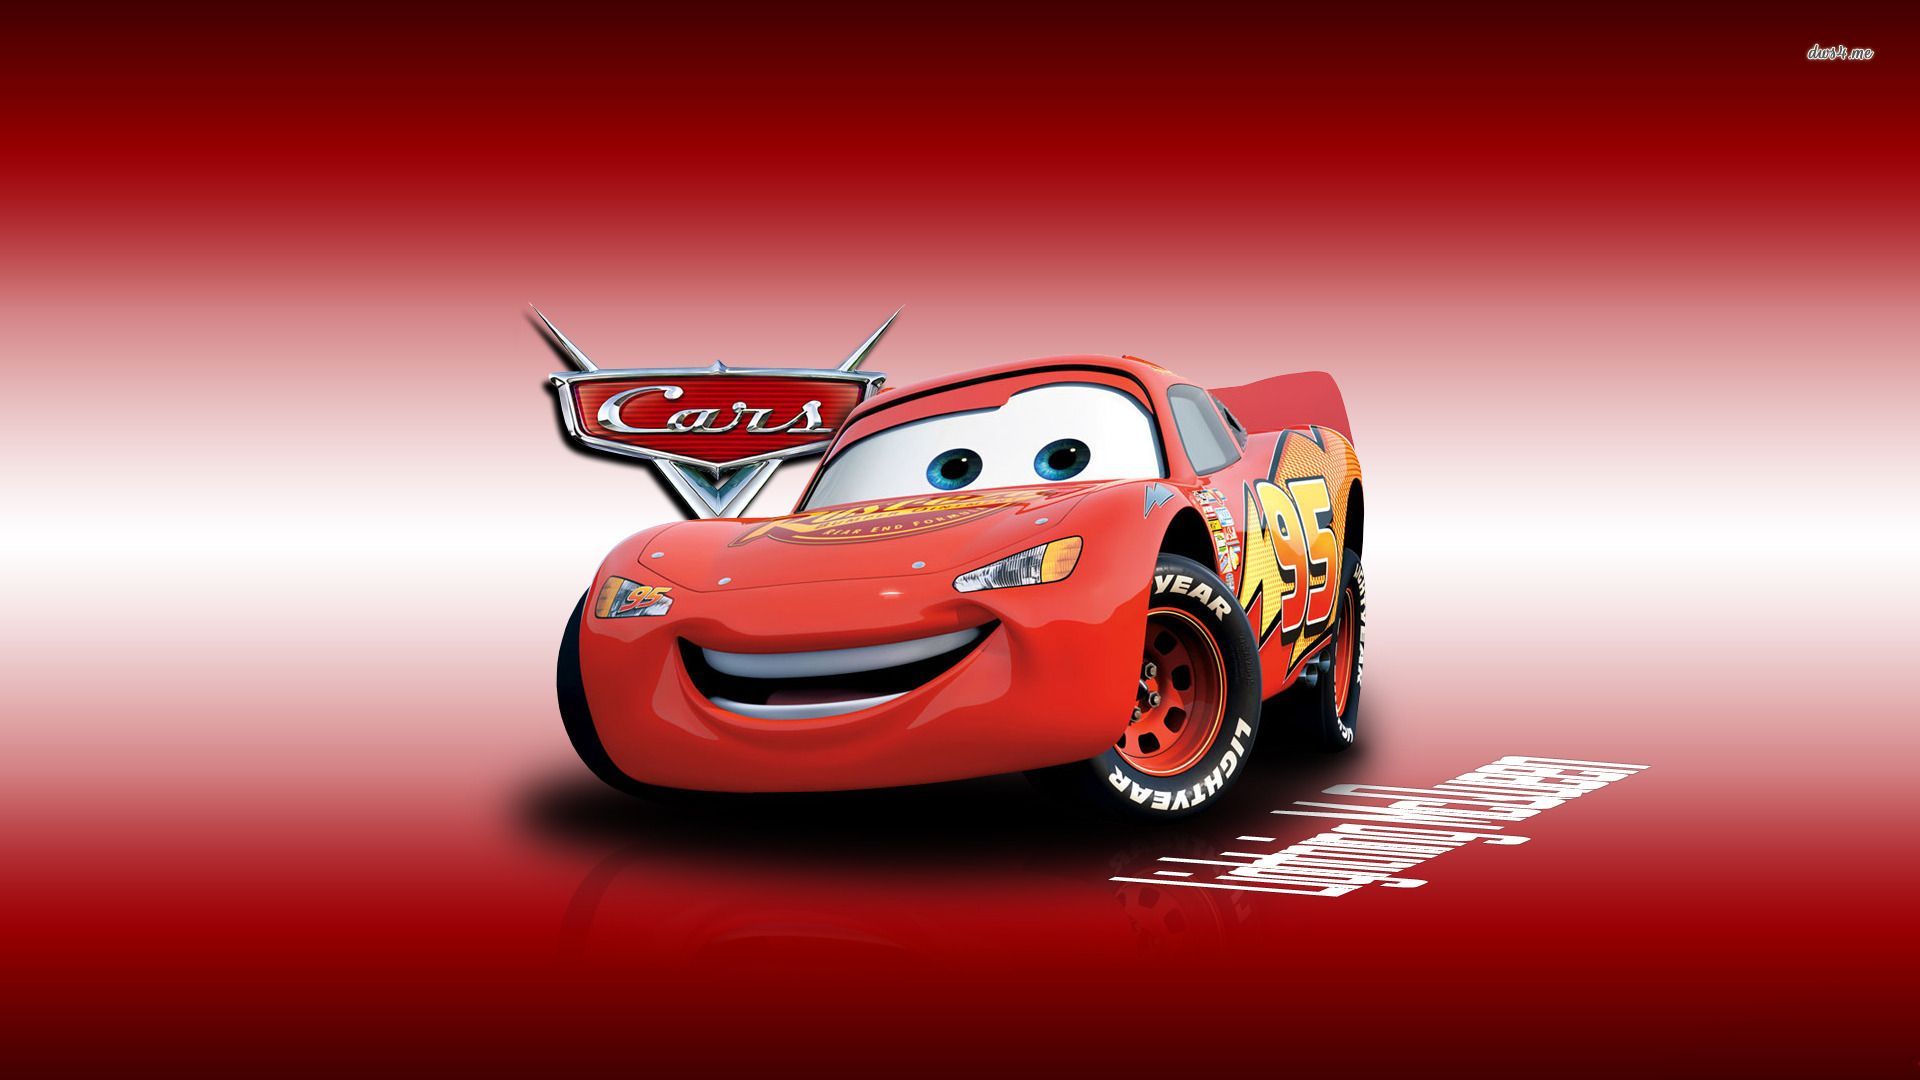 Cars Birthday Wallpaper. Awesome Cars Wallpaper, Disney Cars Wallpaper and Cool Cars Wallpaper